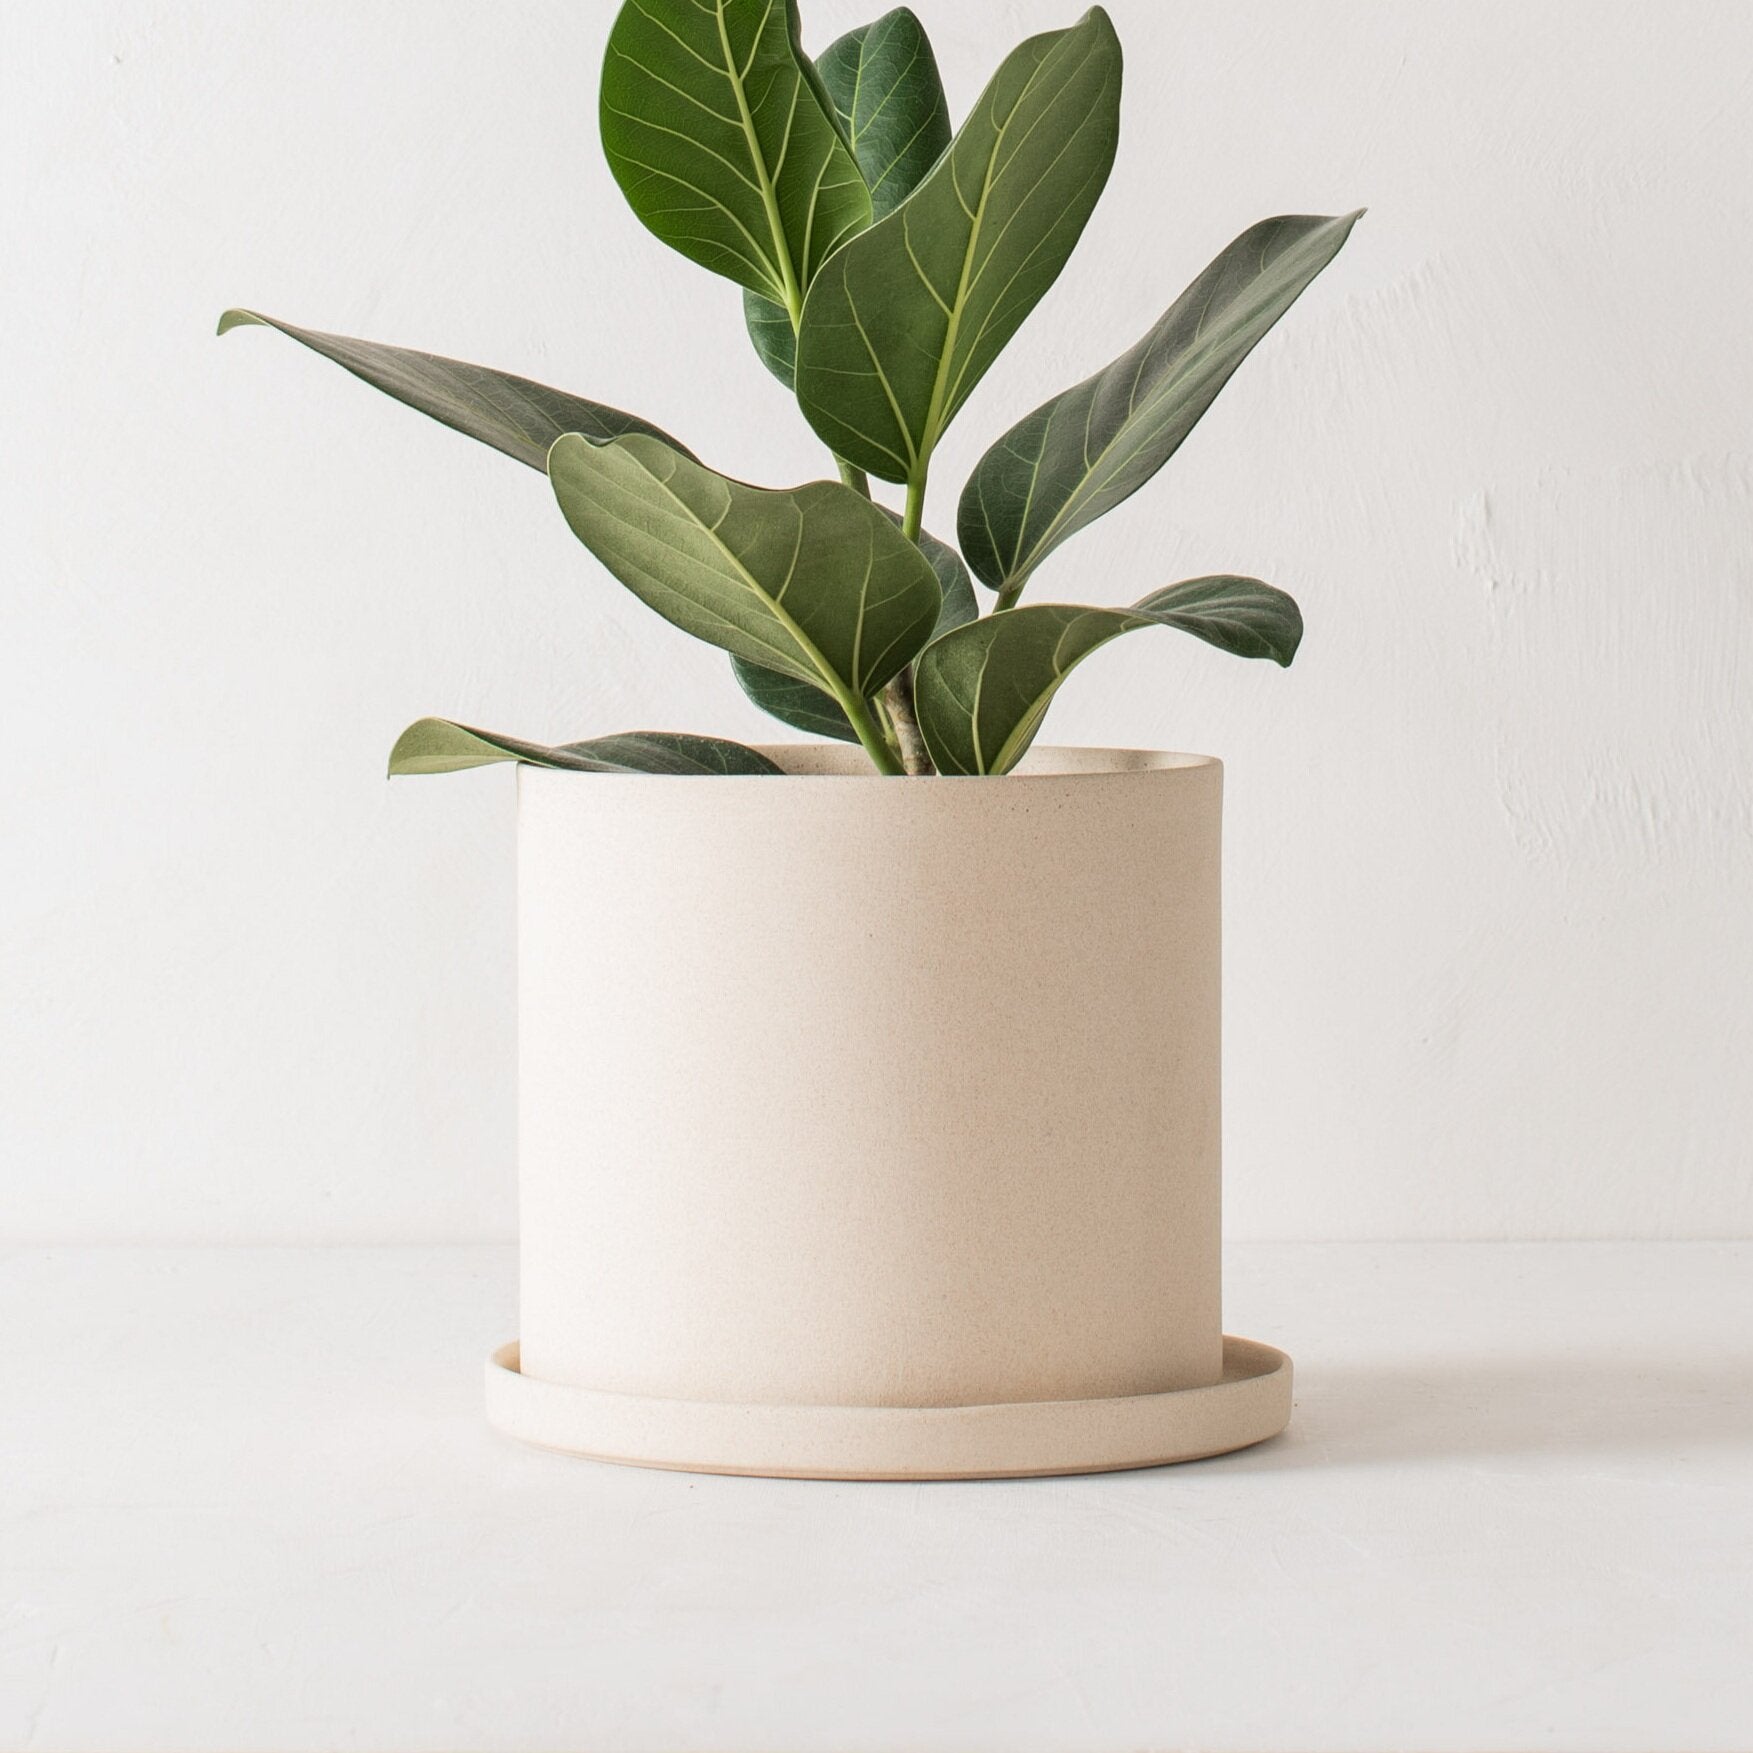 Stoneware 8 inch ceramic planter with bottom drainage dish. Staged on a white plaster textured tabletop against a plaster textured white wall. Audrey Ficus plant inside. Designed by Convivial Production, sold by Shop Verdant Kansas City plant store.